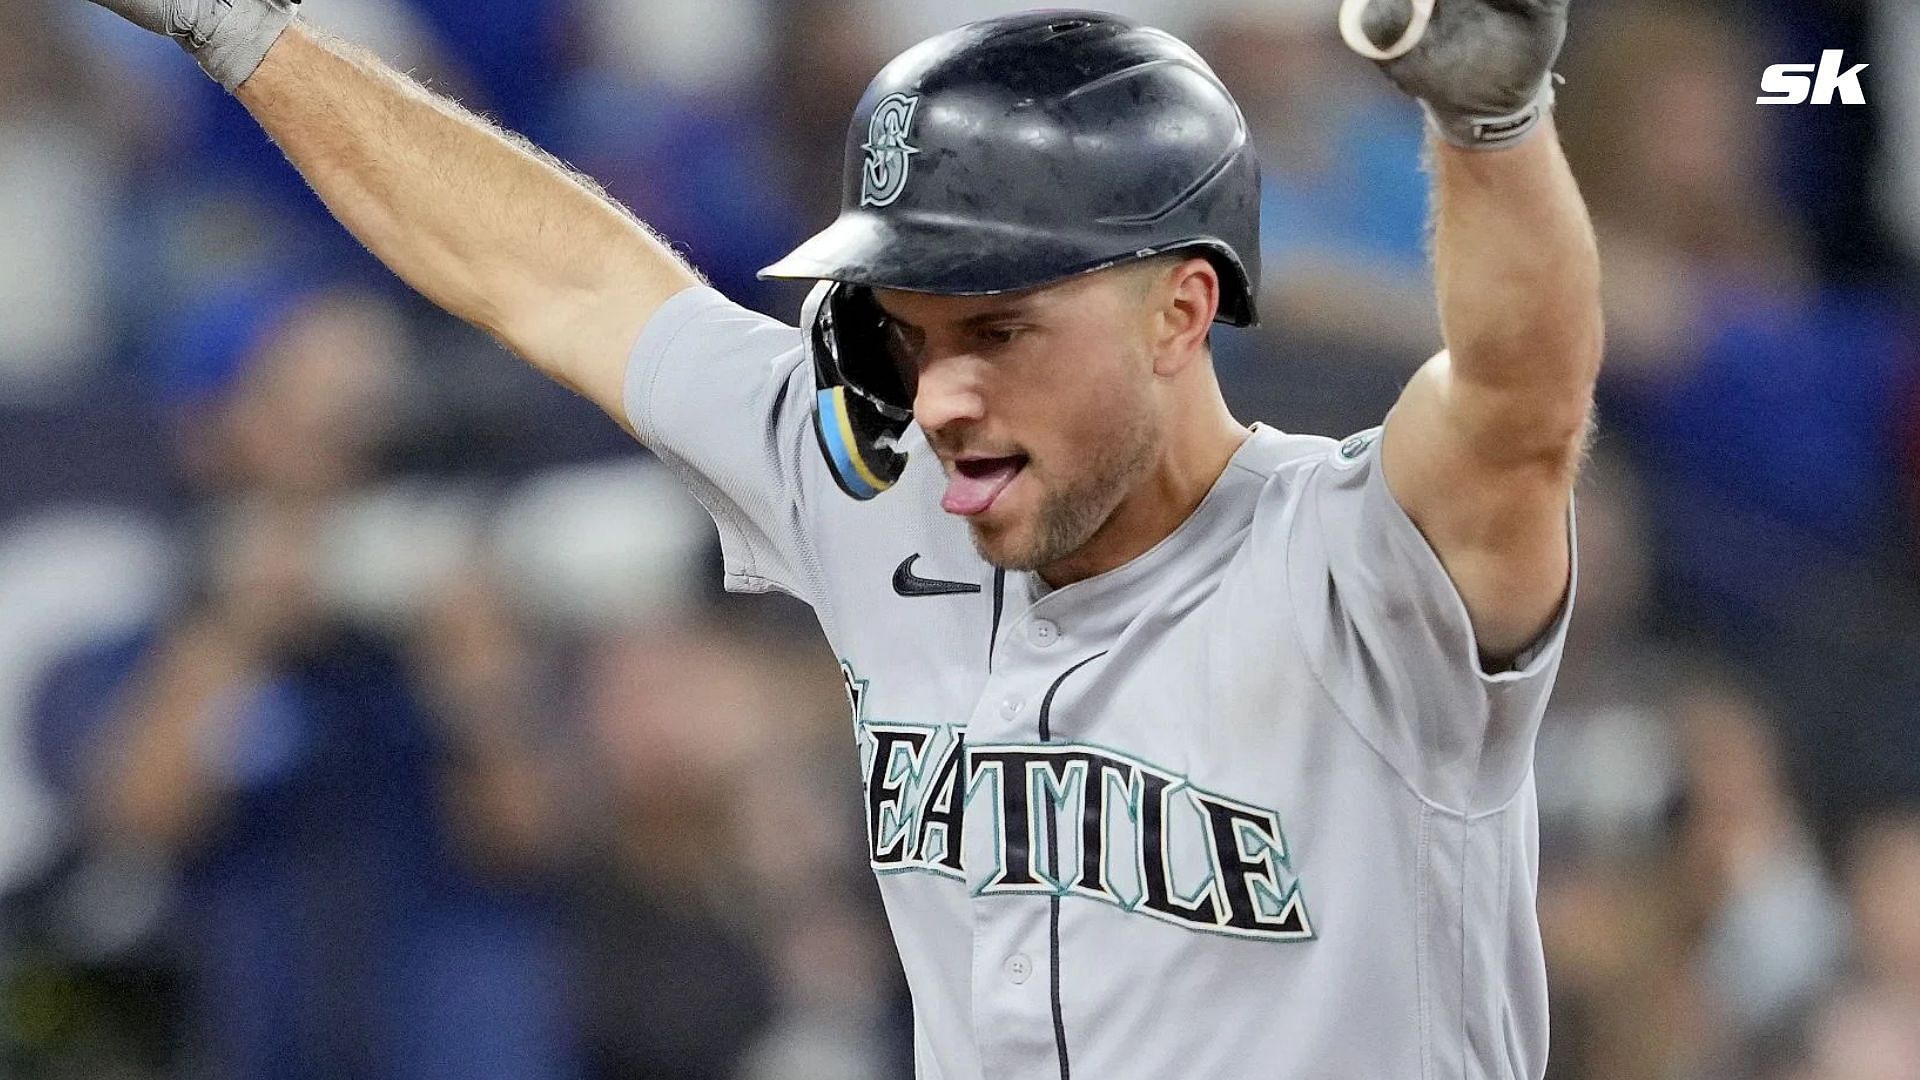 Mitch Haniger's heartwarming goodbye message to the Seattle